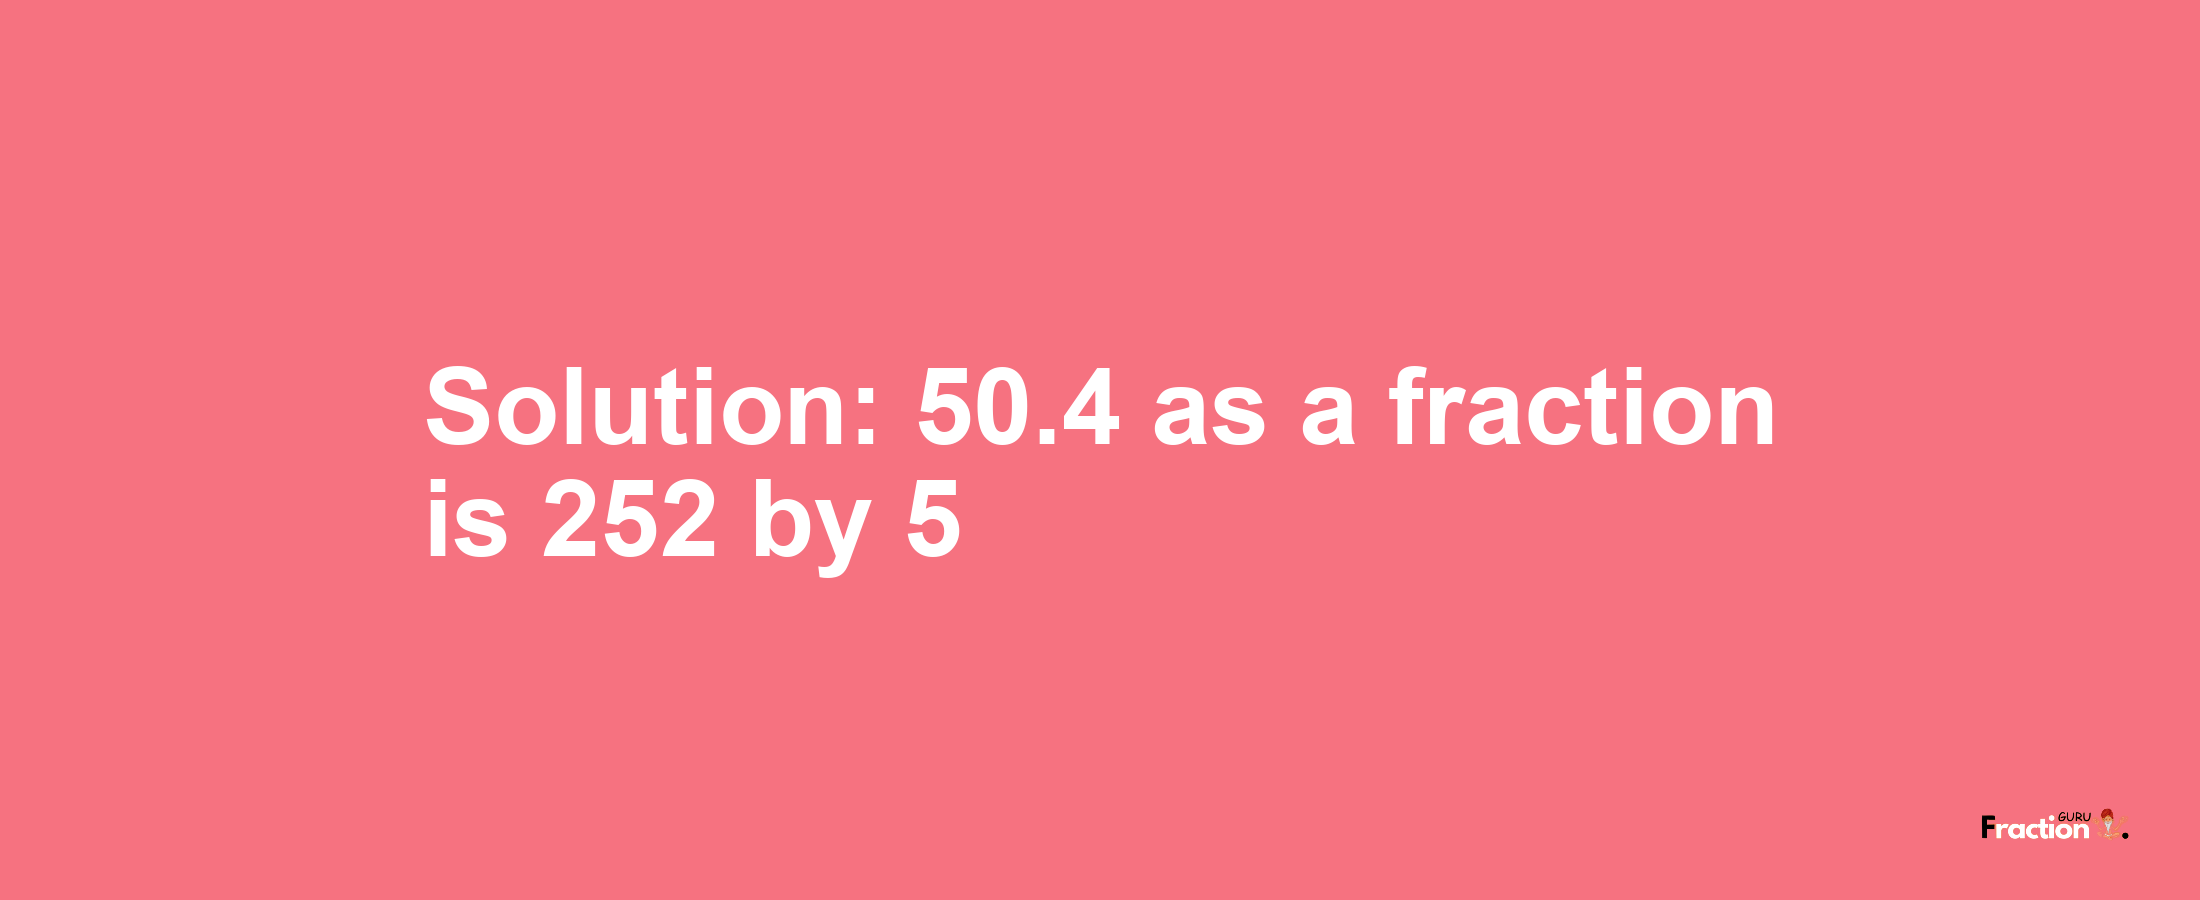 Solution:50.4 as a fraction is 252/5